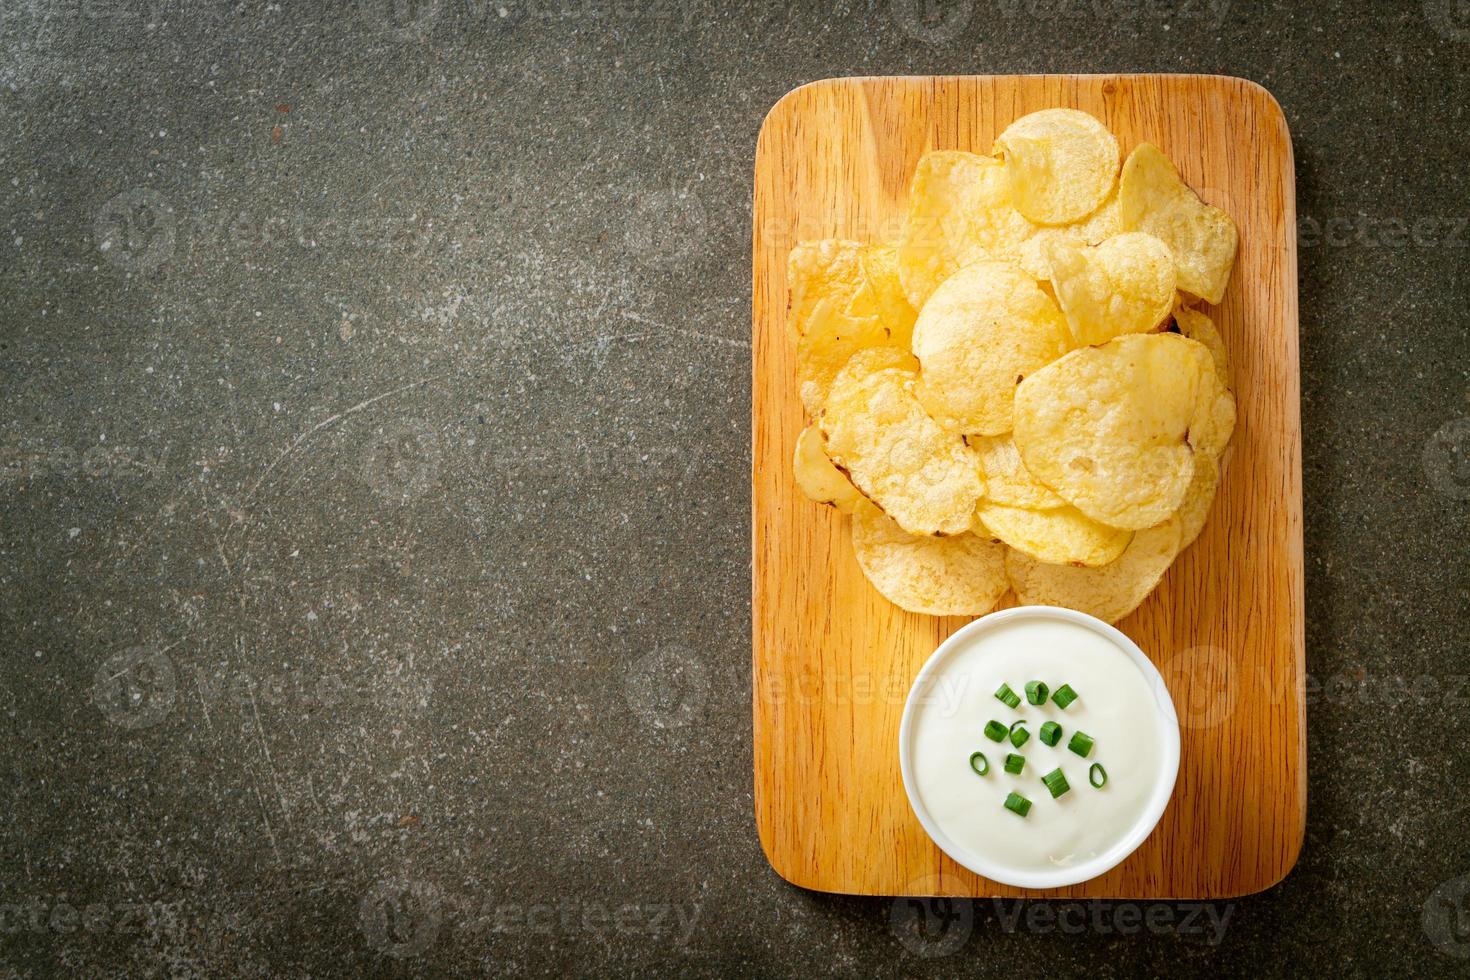 Potato chips with sour cream dipping sauce photo